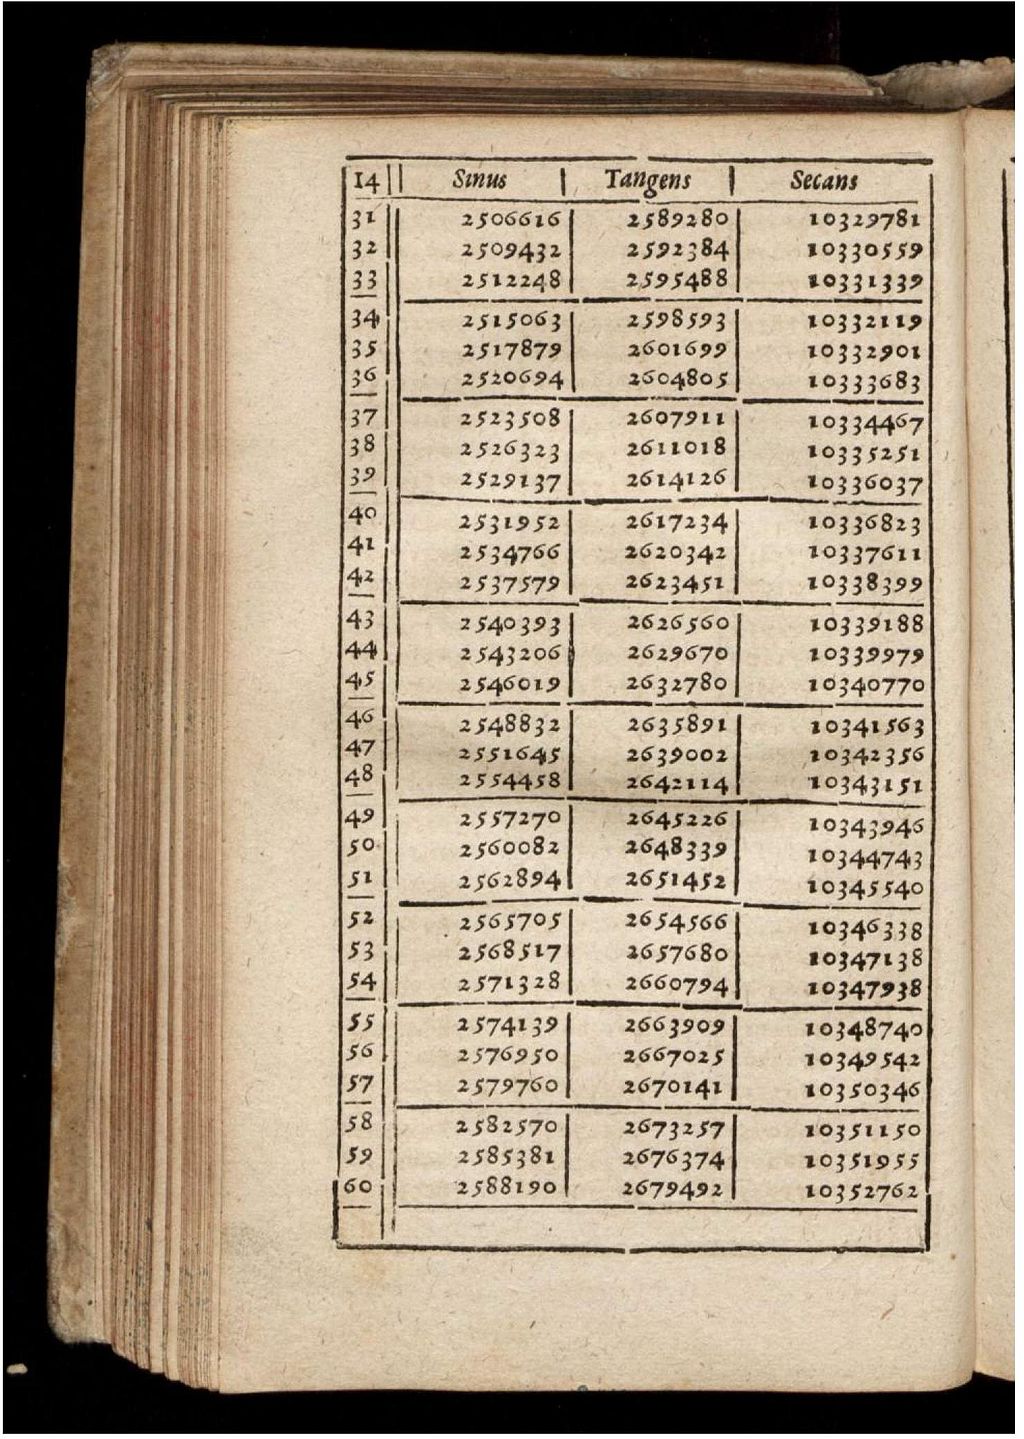 A page from a 1619 book of mathematical tables by Matthias Bernegger, showing values for the sine, tangent, and secant trigonometric functions.